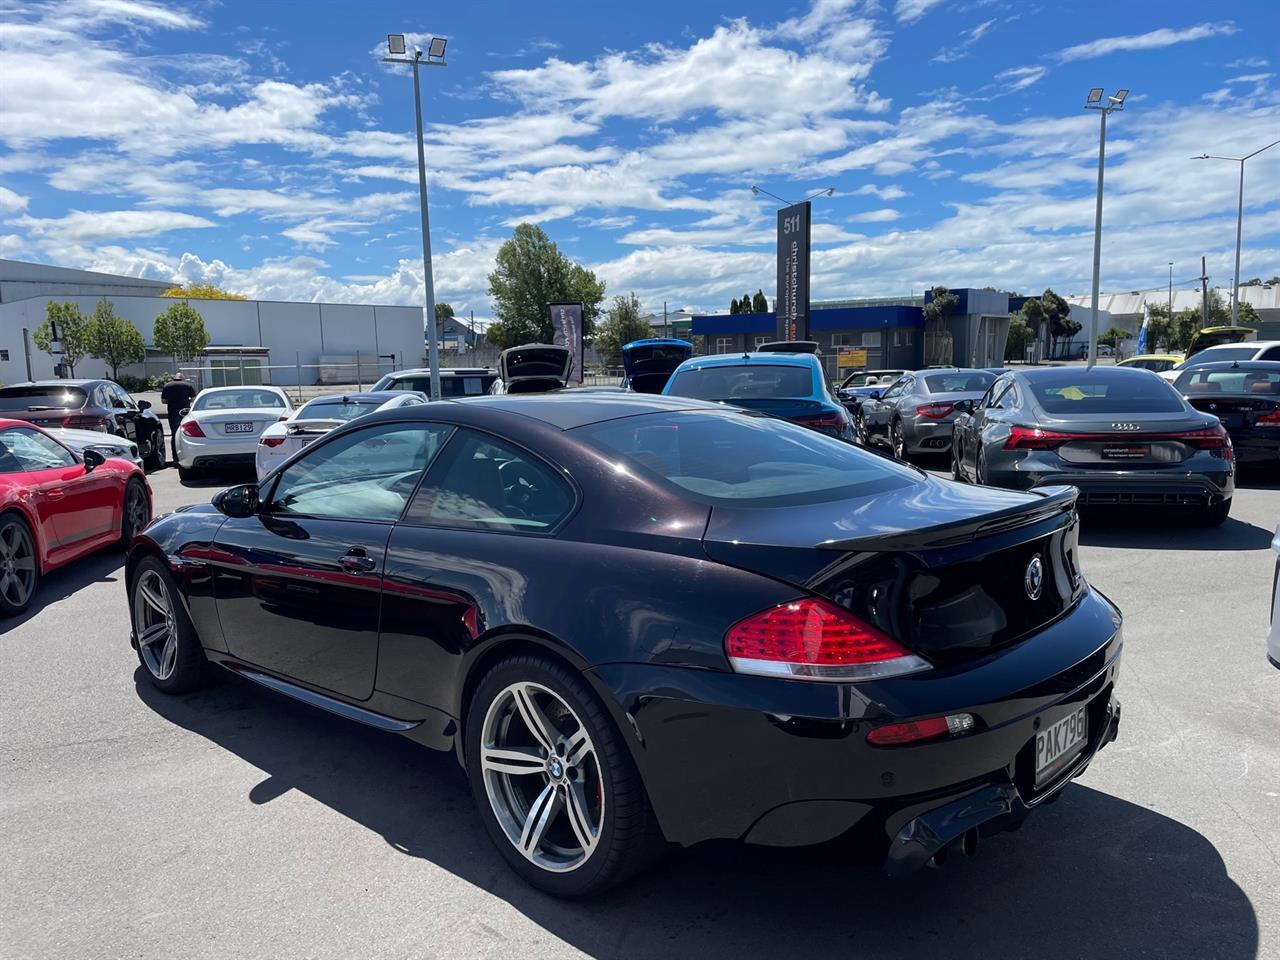 image-3, 2006 BMW M6 5.0 V10 SMG Coupe Carbon Package at Christchurch